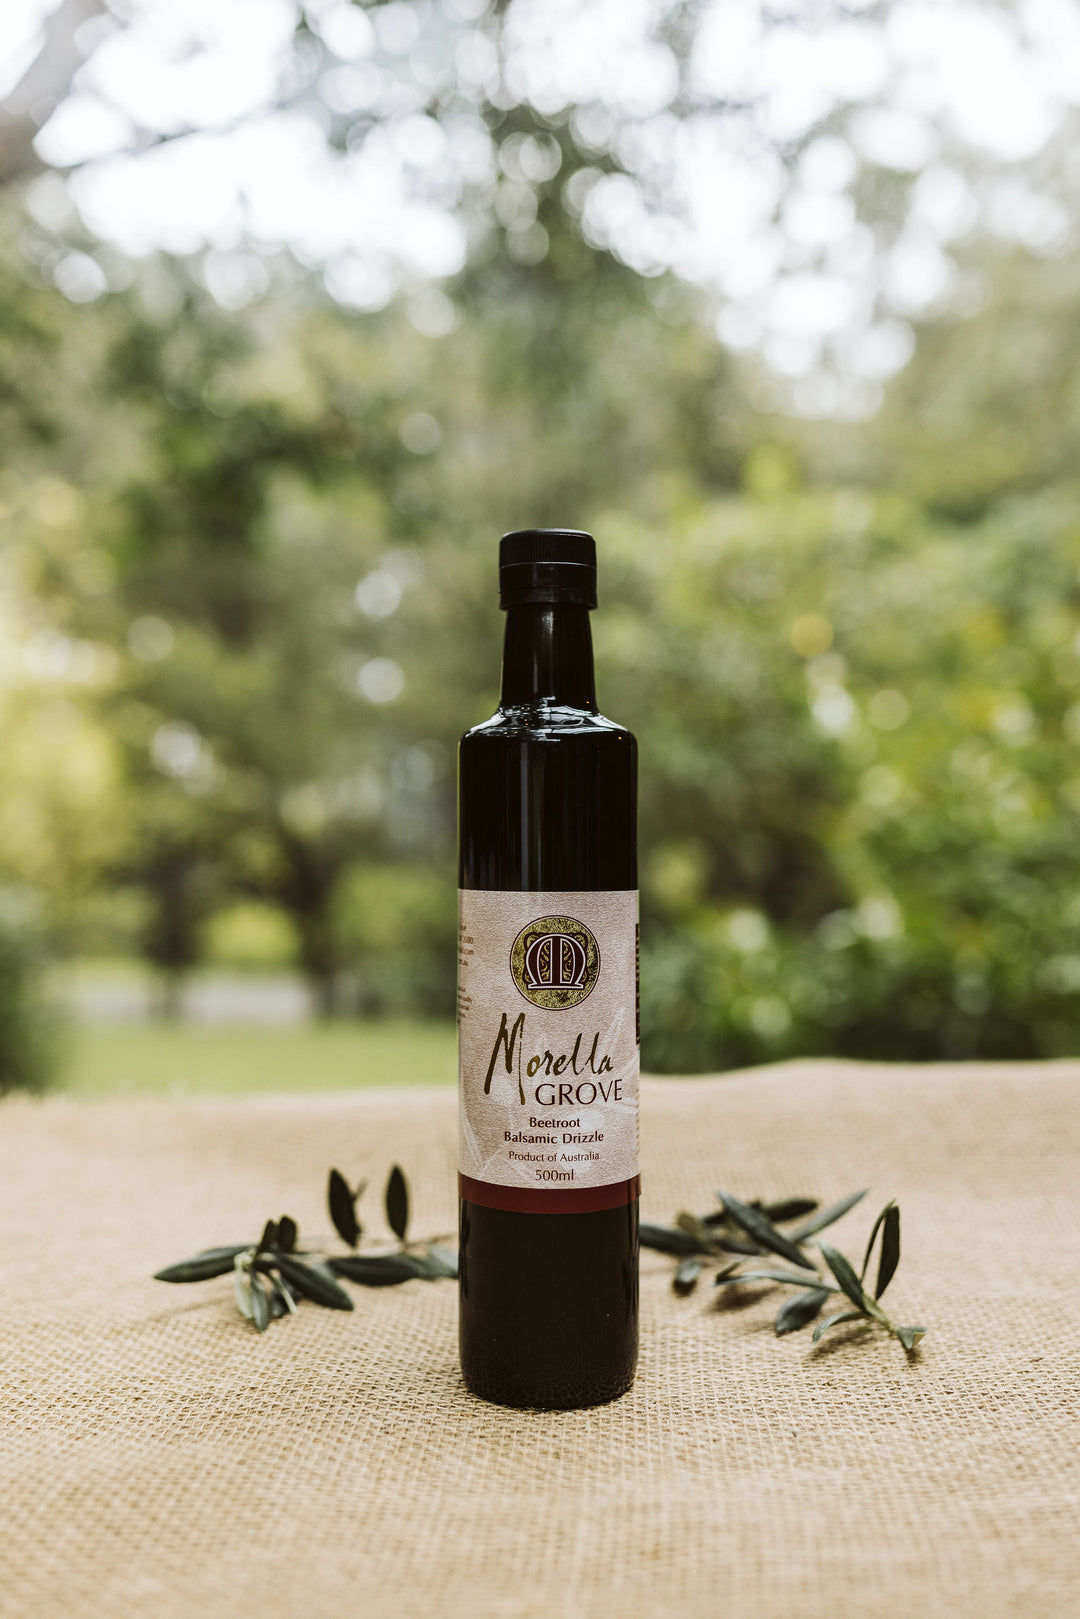 Beetroot Balsamic Drizzle 100ml - 500ml